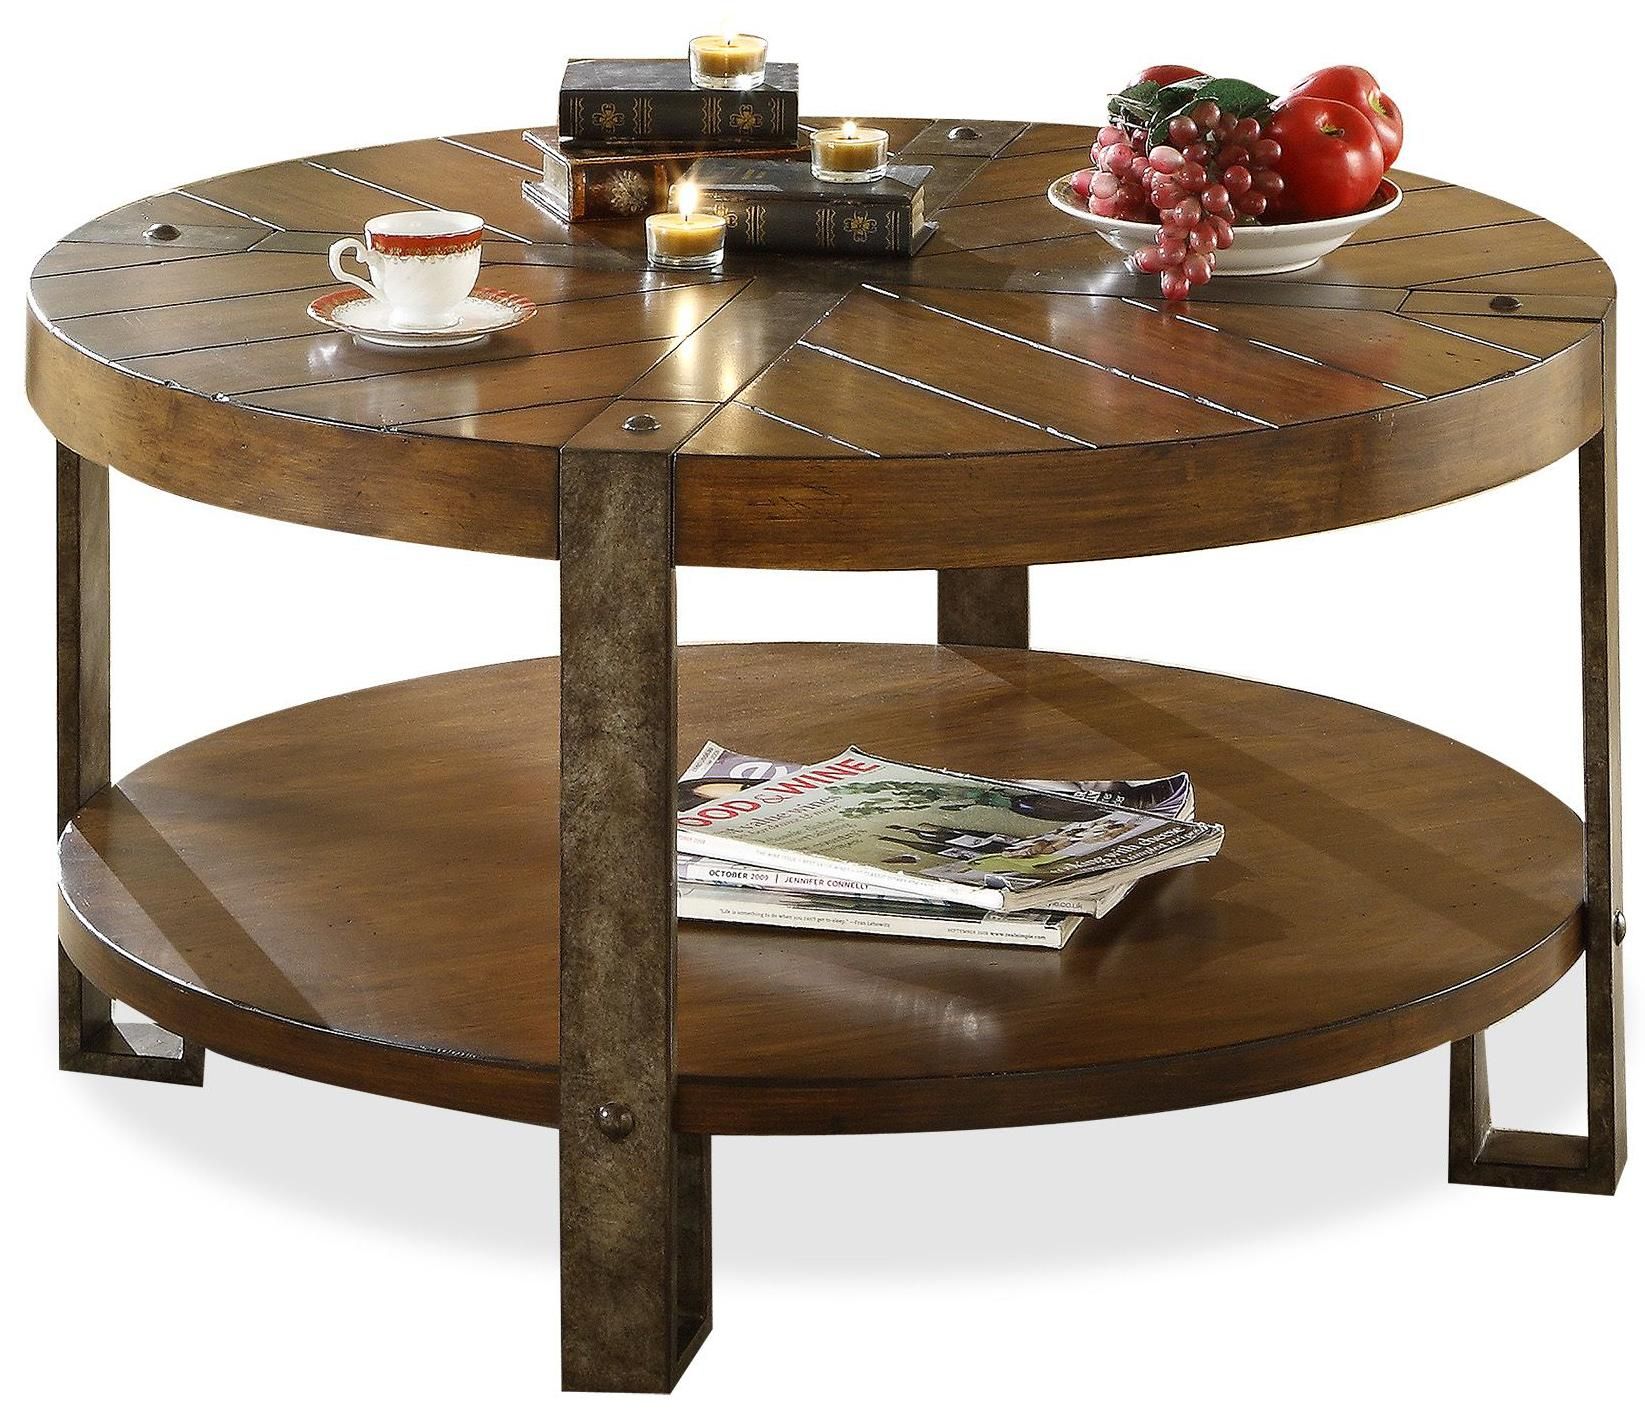 Round Coffee Tables With Storage – Homesfeed Regarding Round Coffee Tables With Storage (View 8 of 20)